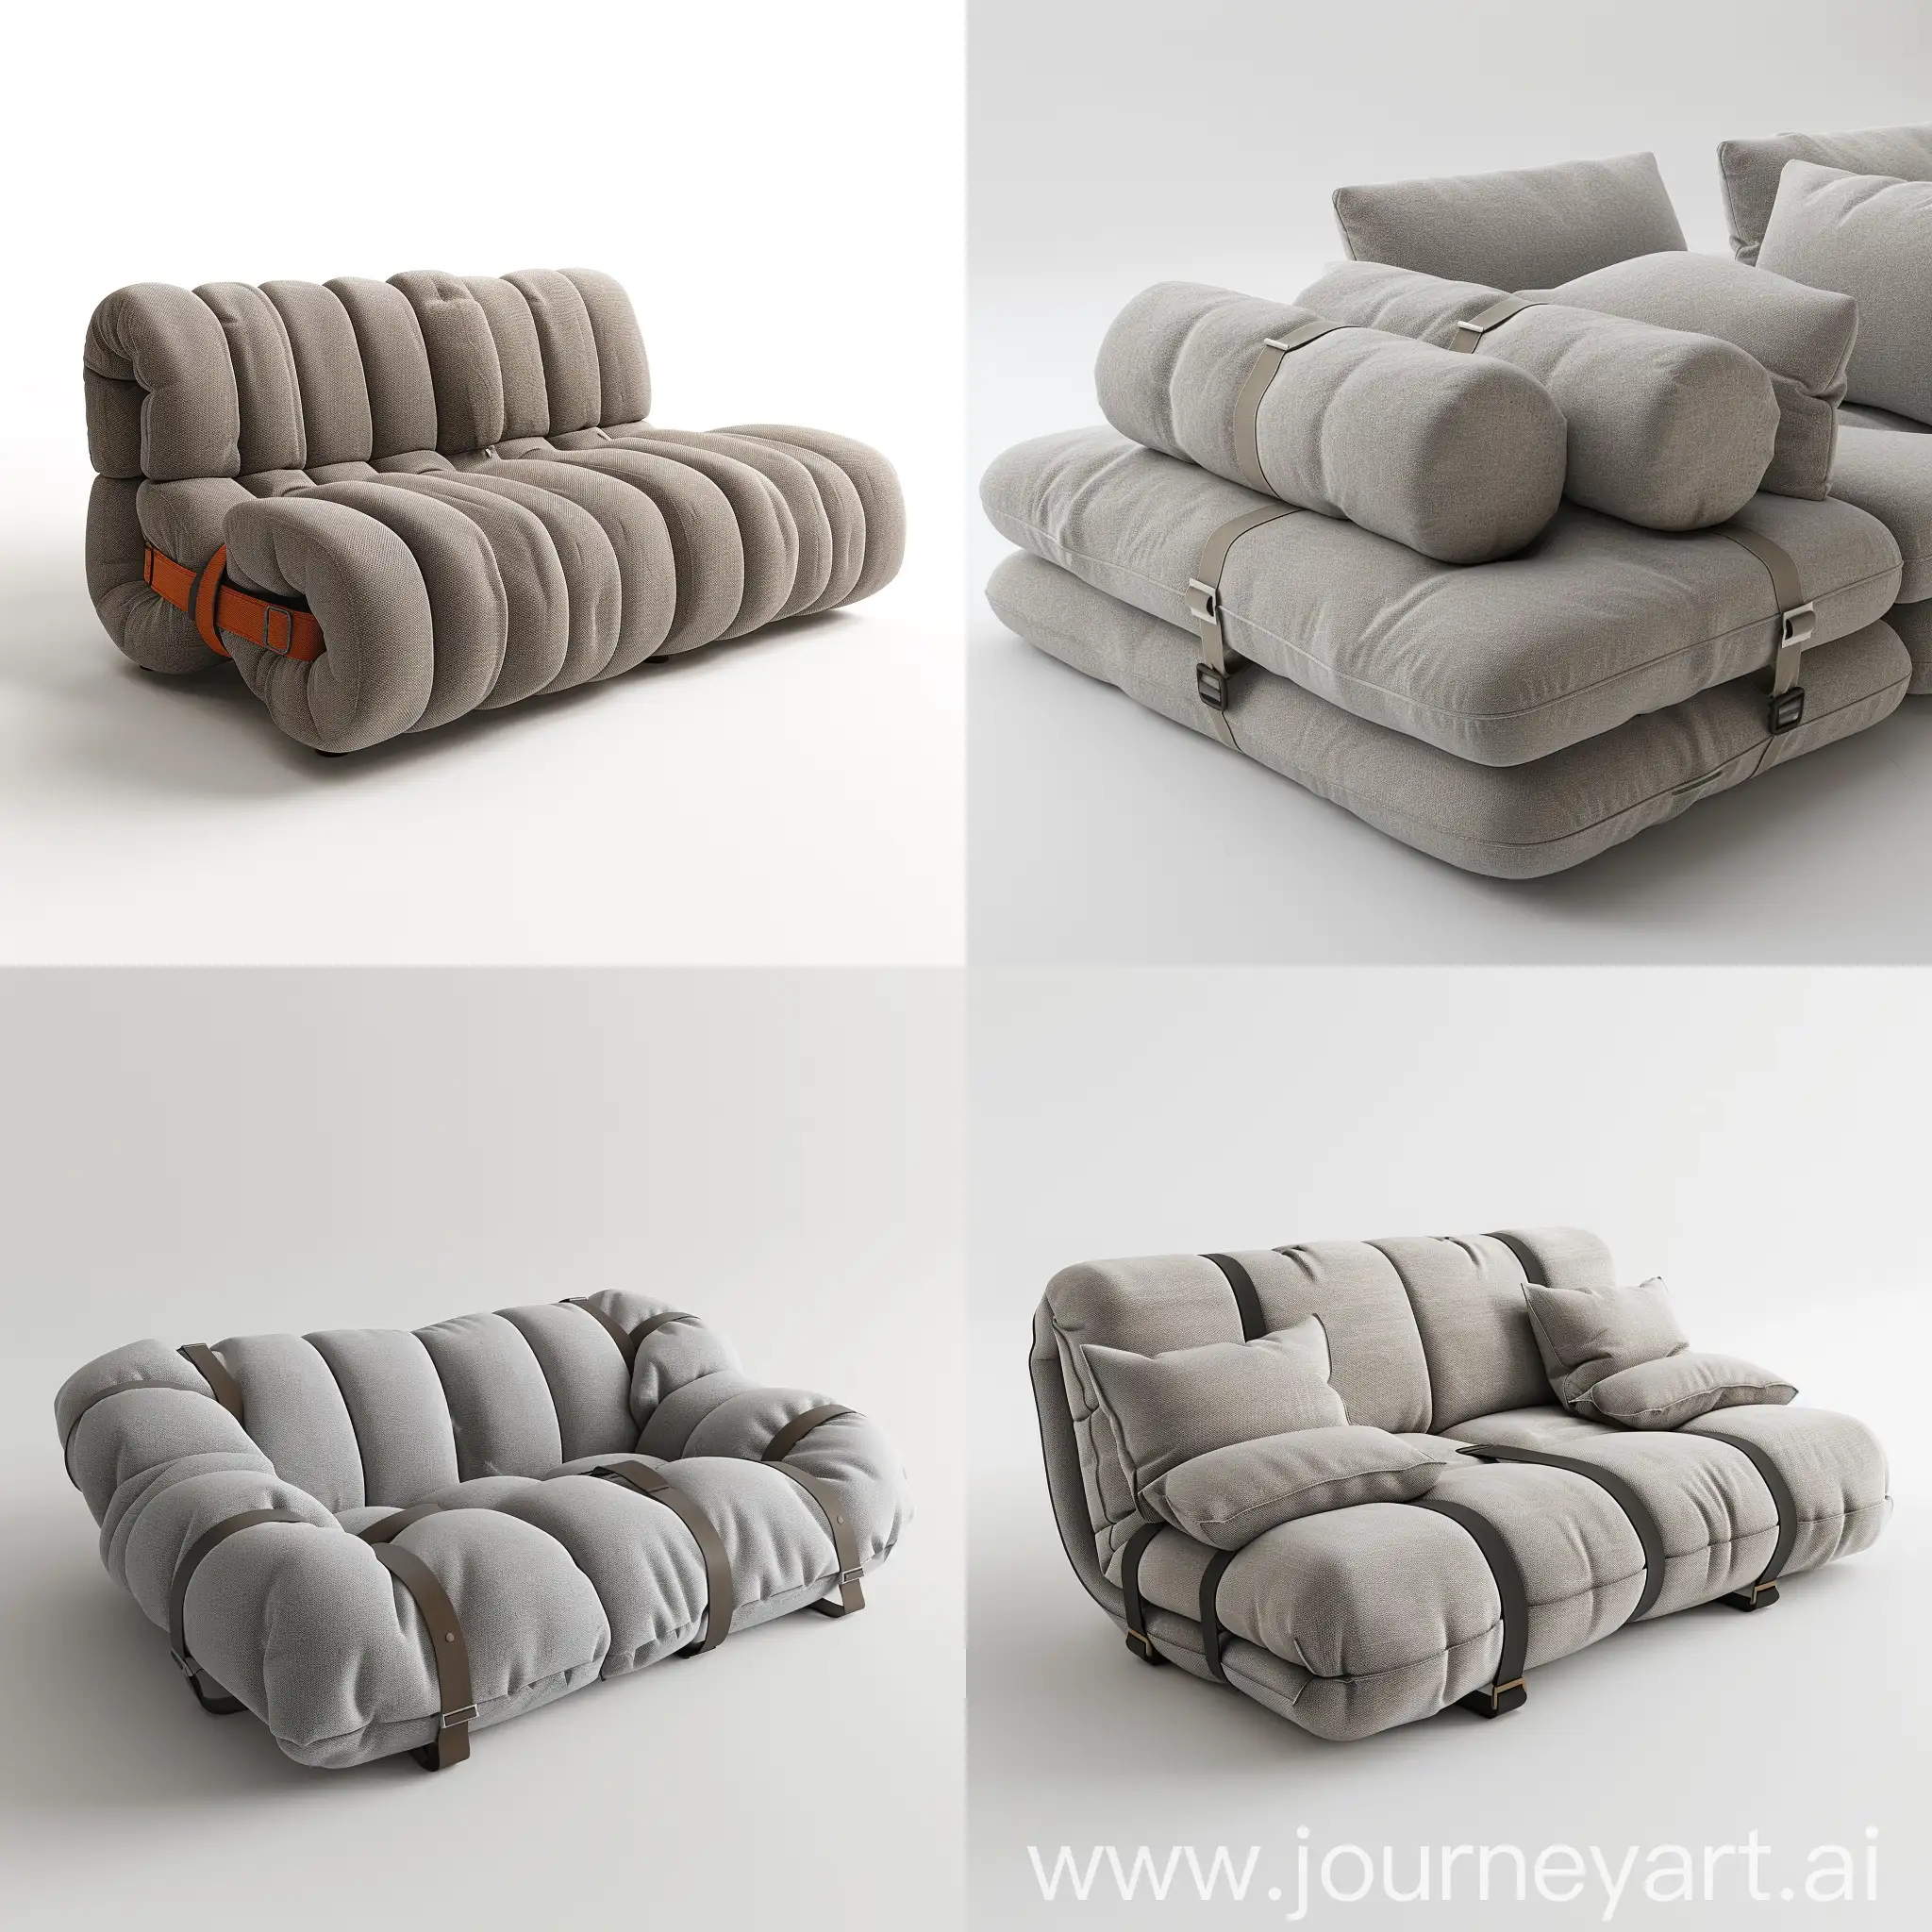 Contemporary-Modular-Sofa-with-Folded-Surfaces-on-White-Background